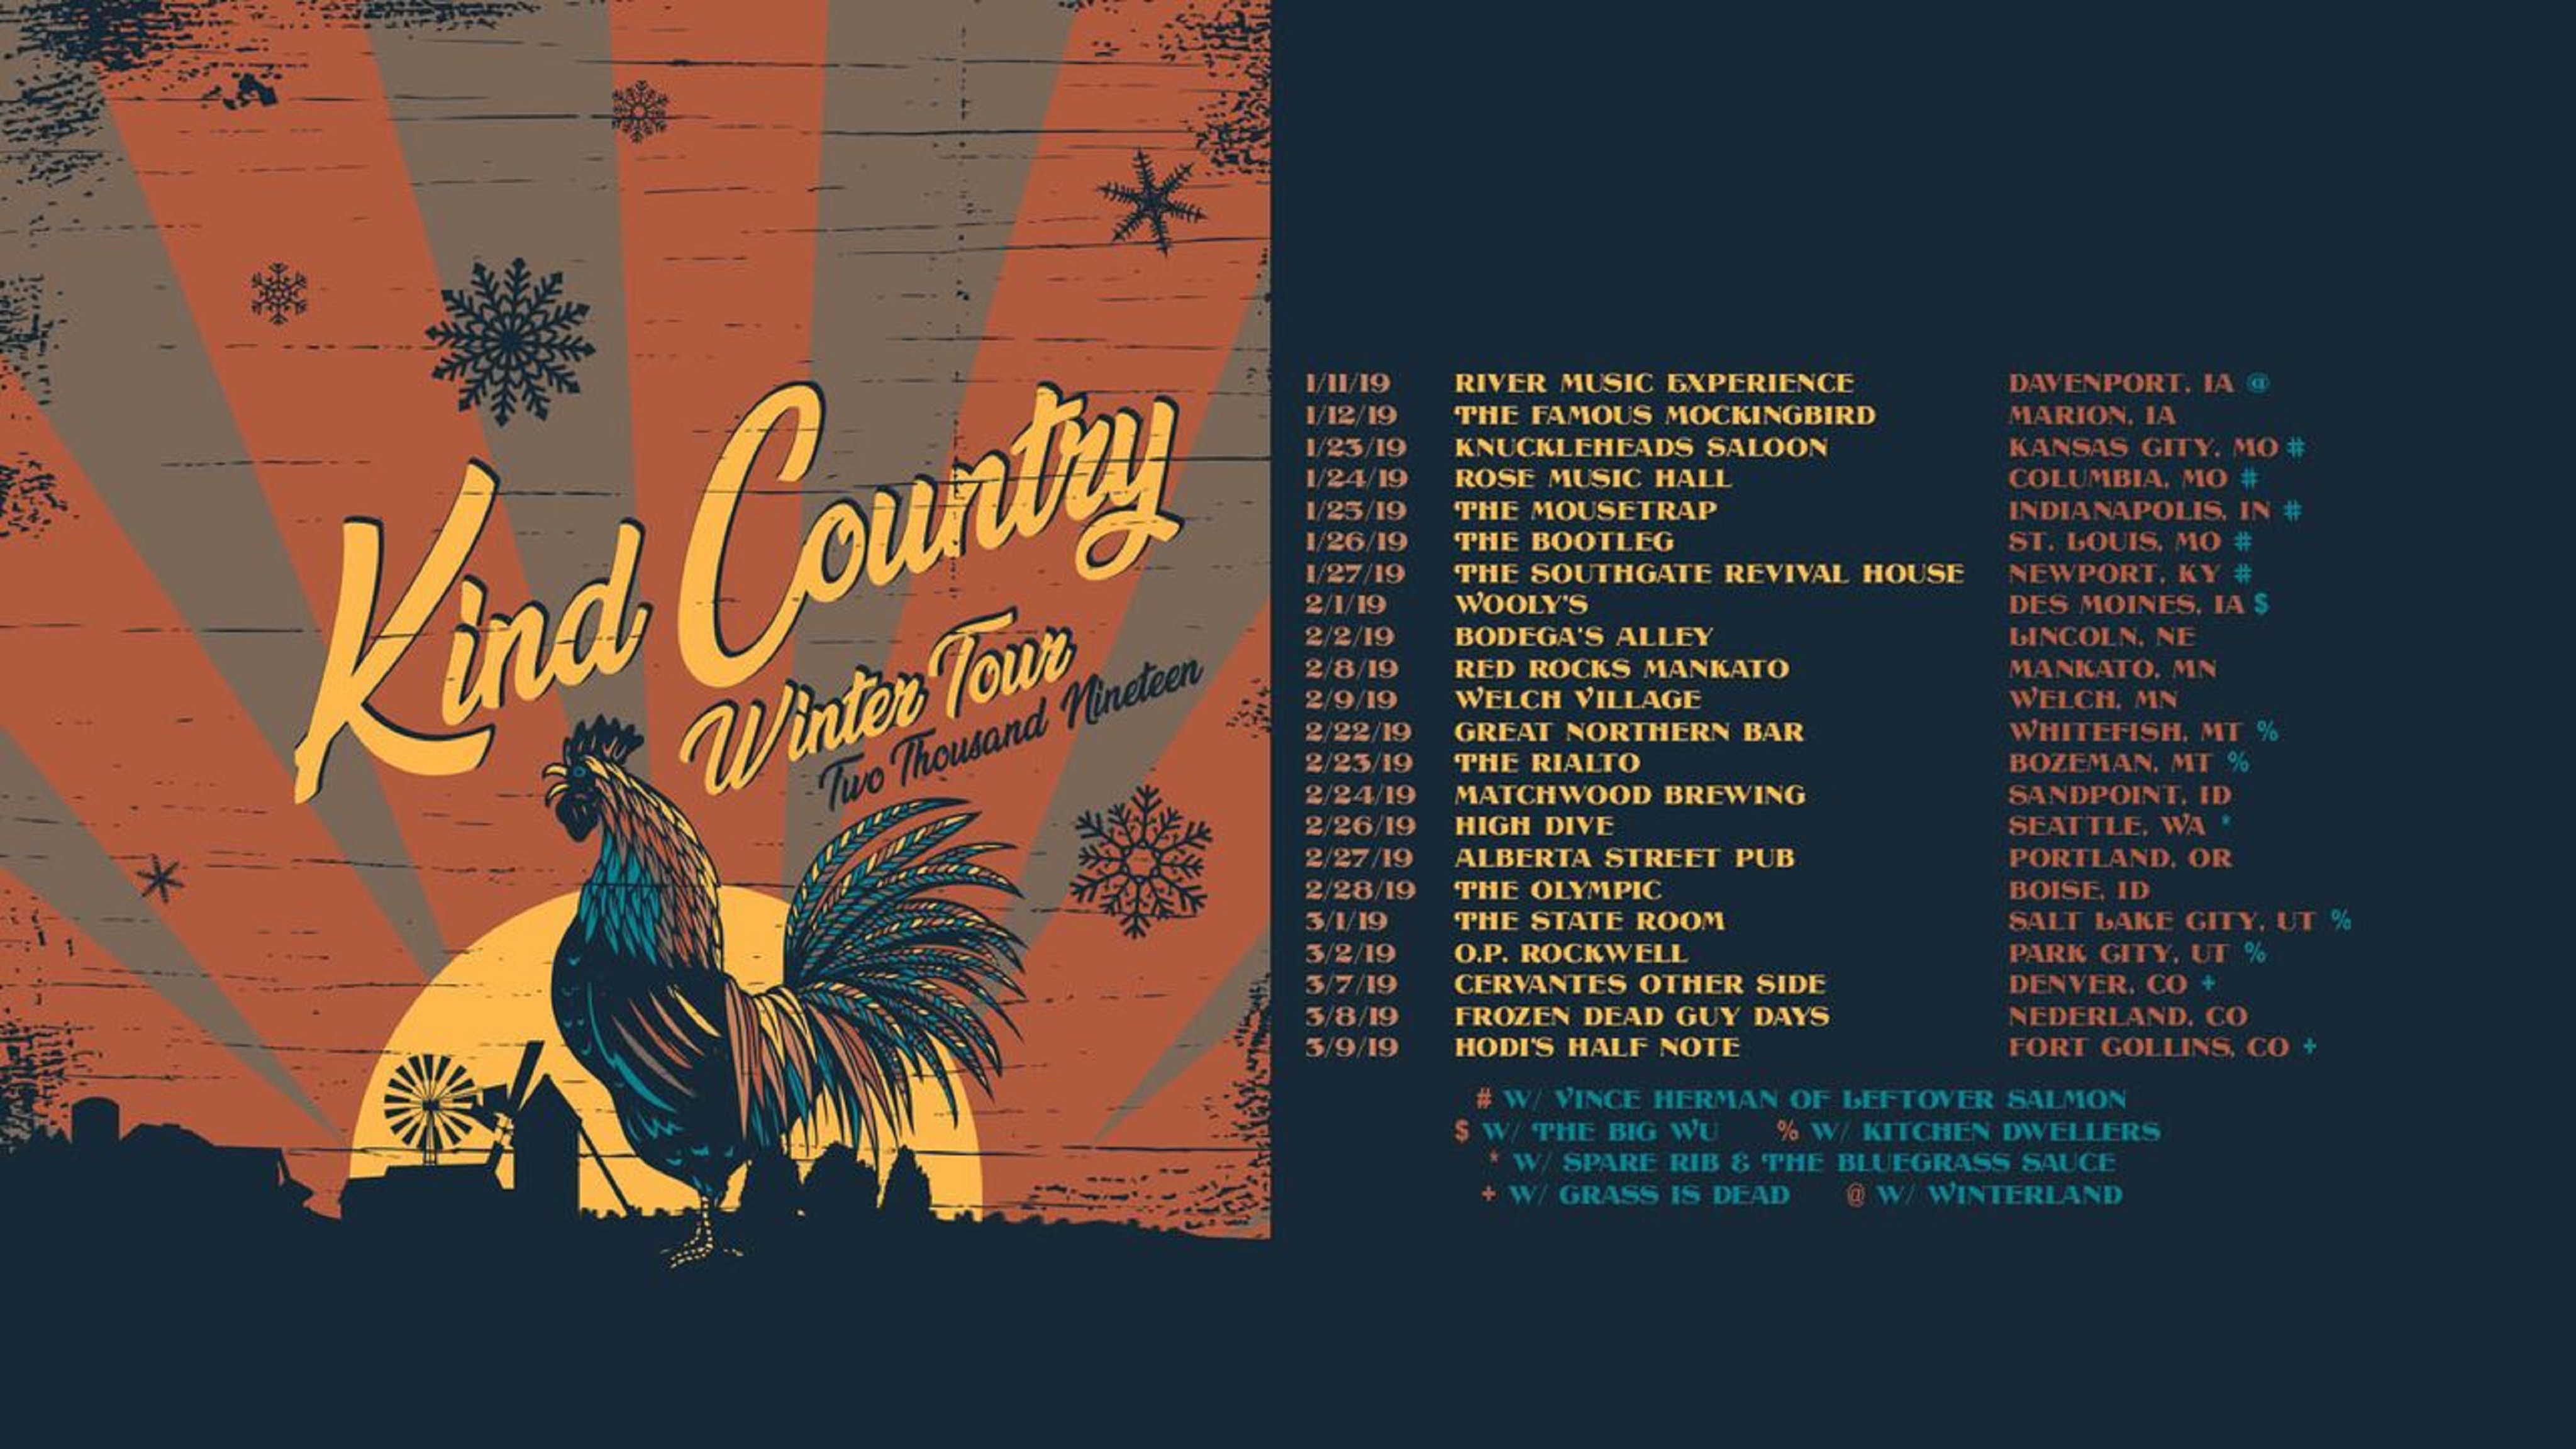 Kind Country On Their 2019 Winter Tour Now